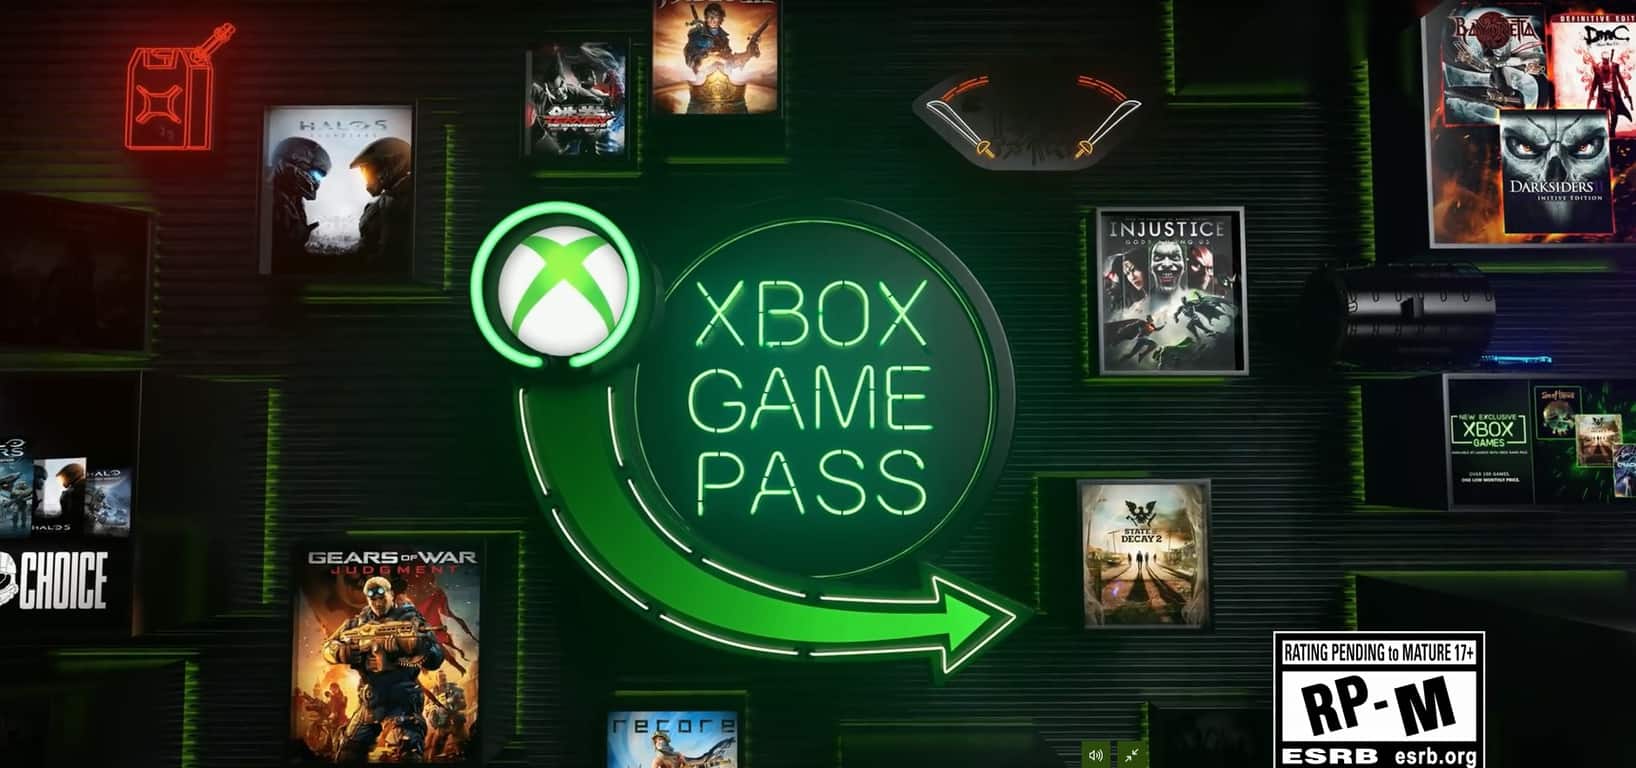 Xbox Game Pass is fair for developers, these Gamelab panelists agree - OnMSFT.com - July 8, 2019